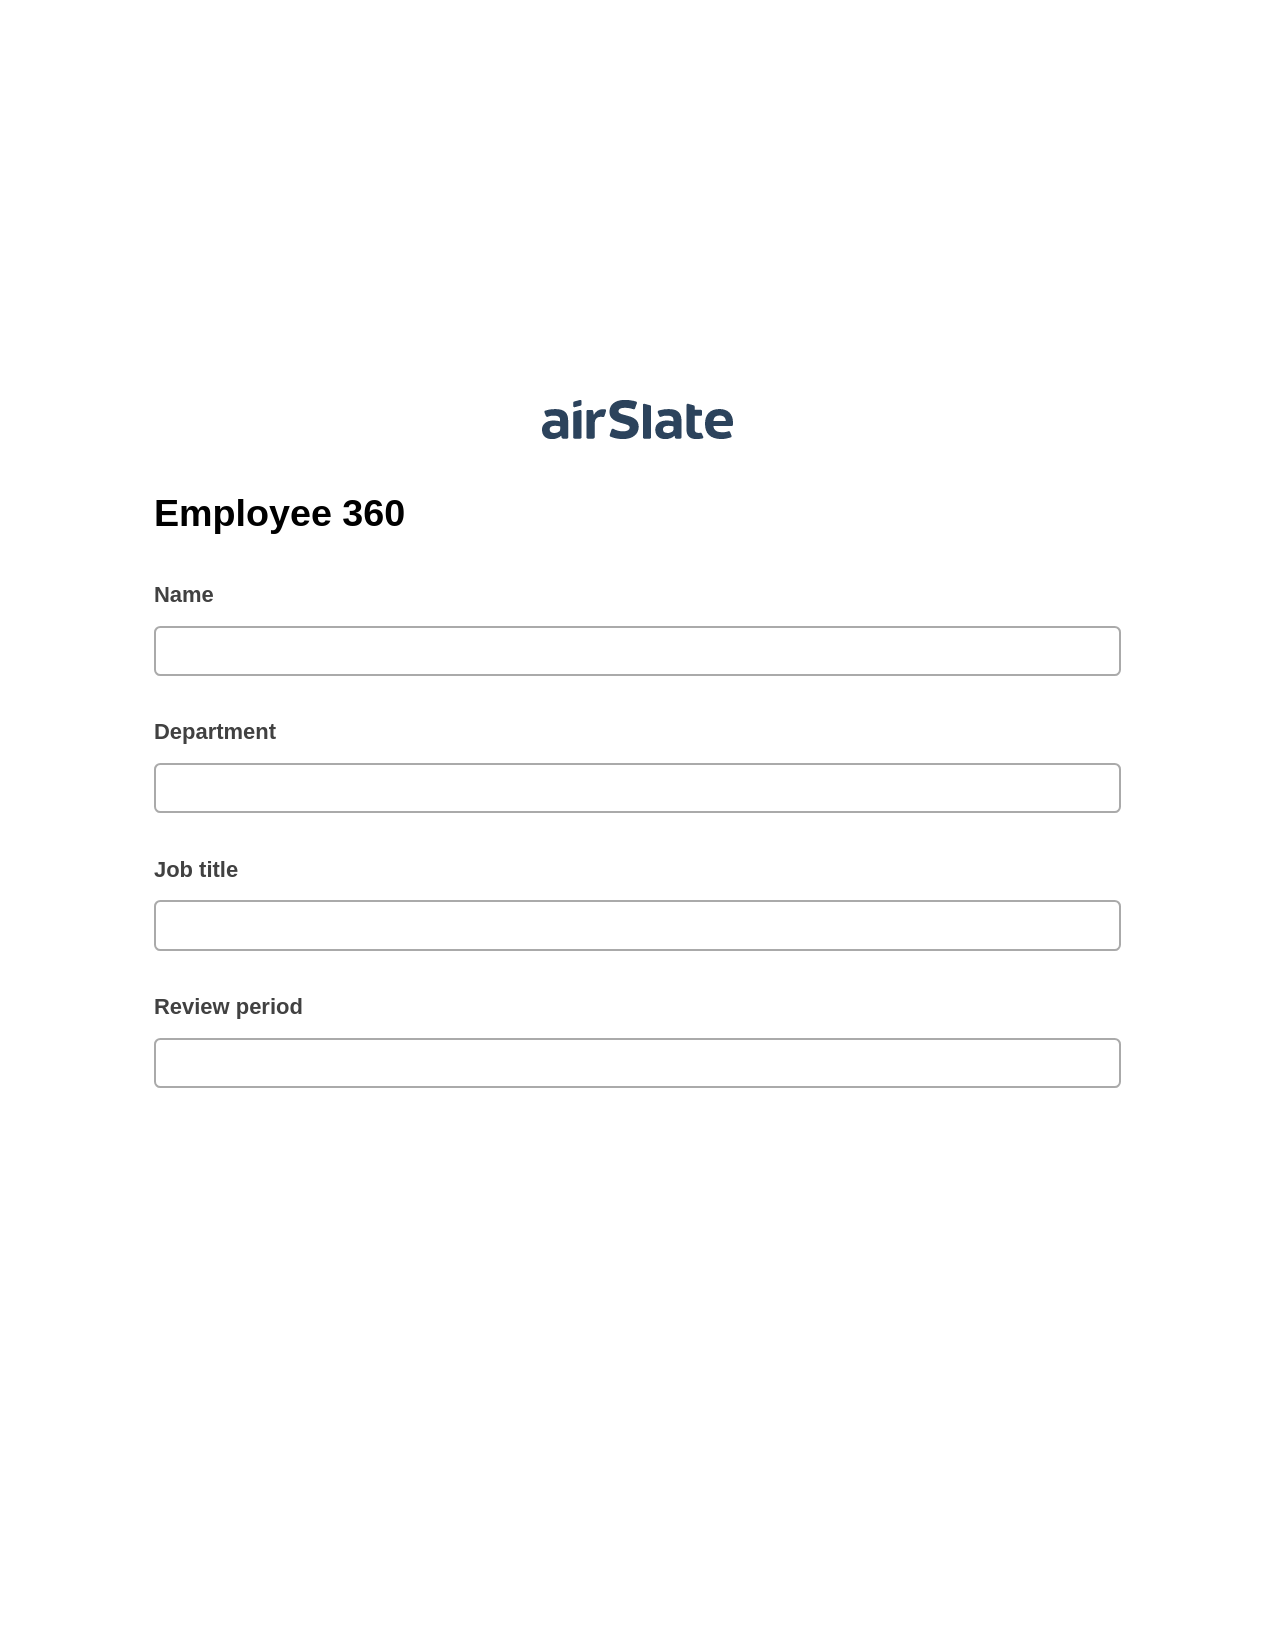 Employee 360 Pre-fill from Salesforce Records Bot, Unassign Role Bot, Archive to OneDrive Bot